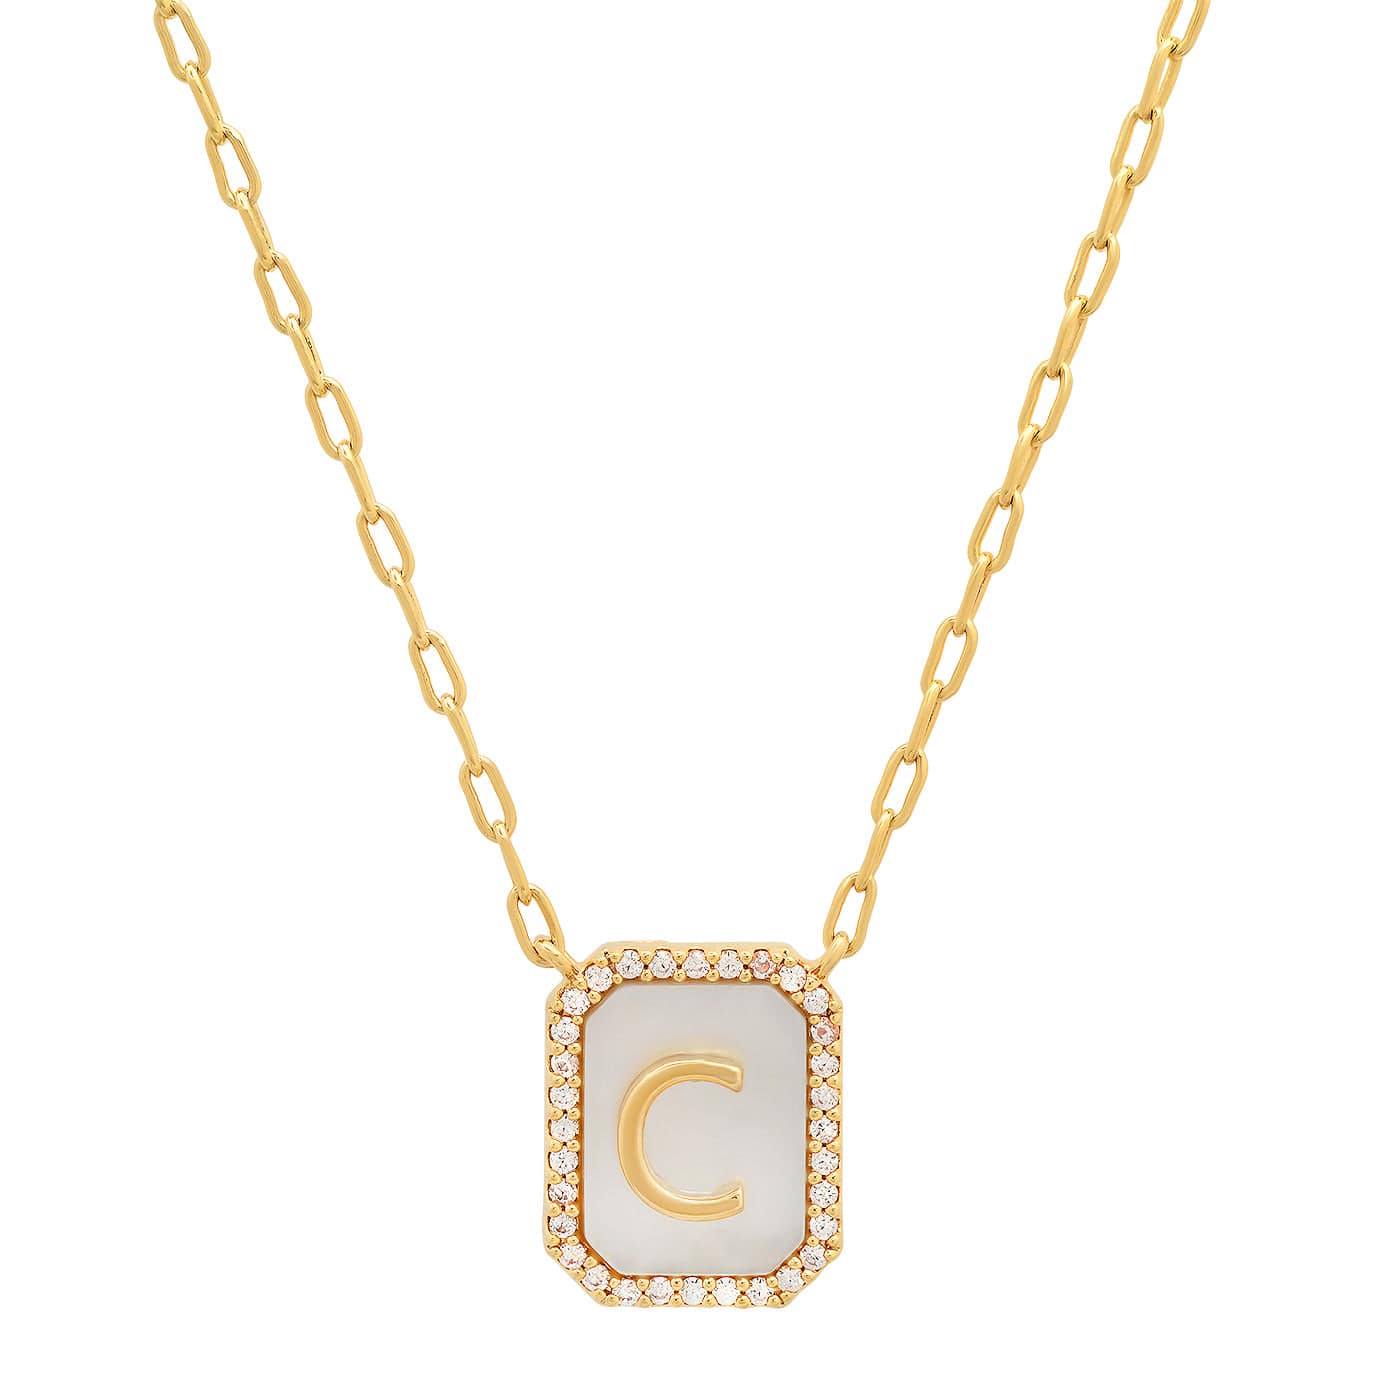 TAI JEWELRY Necklace C Mother Of Pearl Monogram Necklace